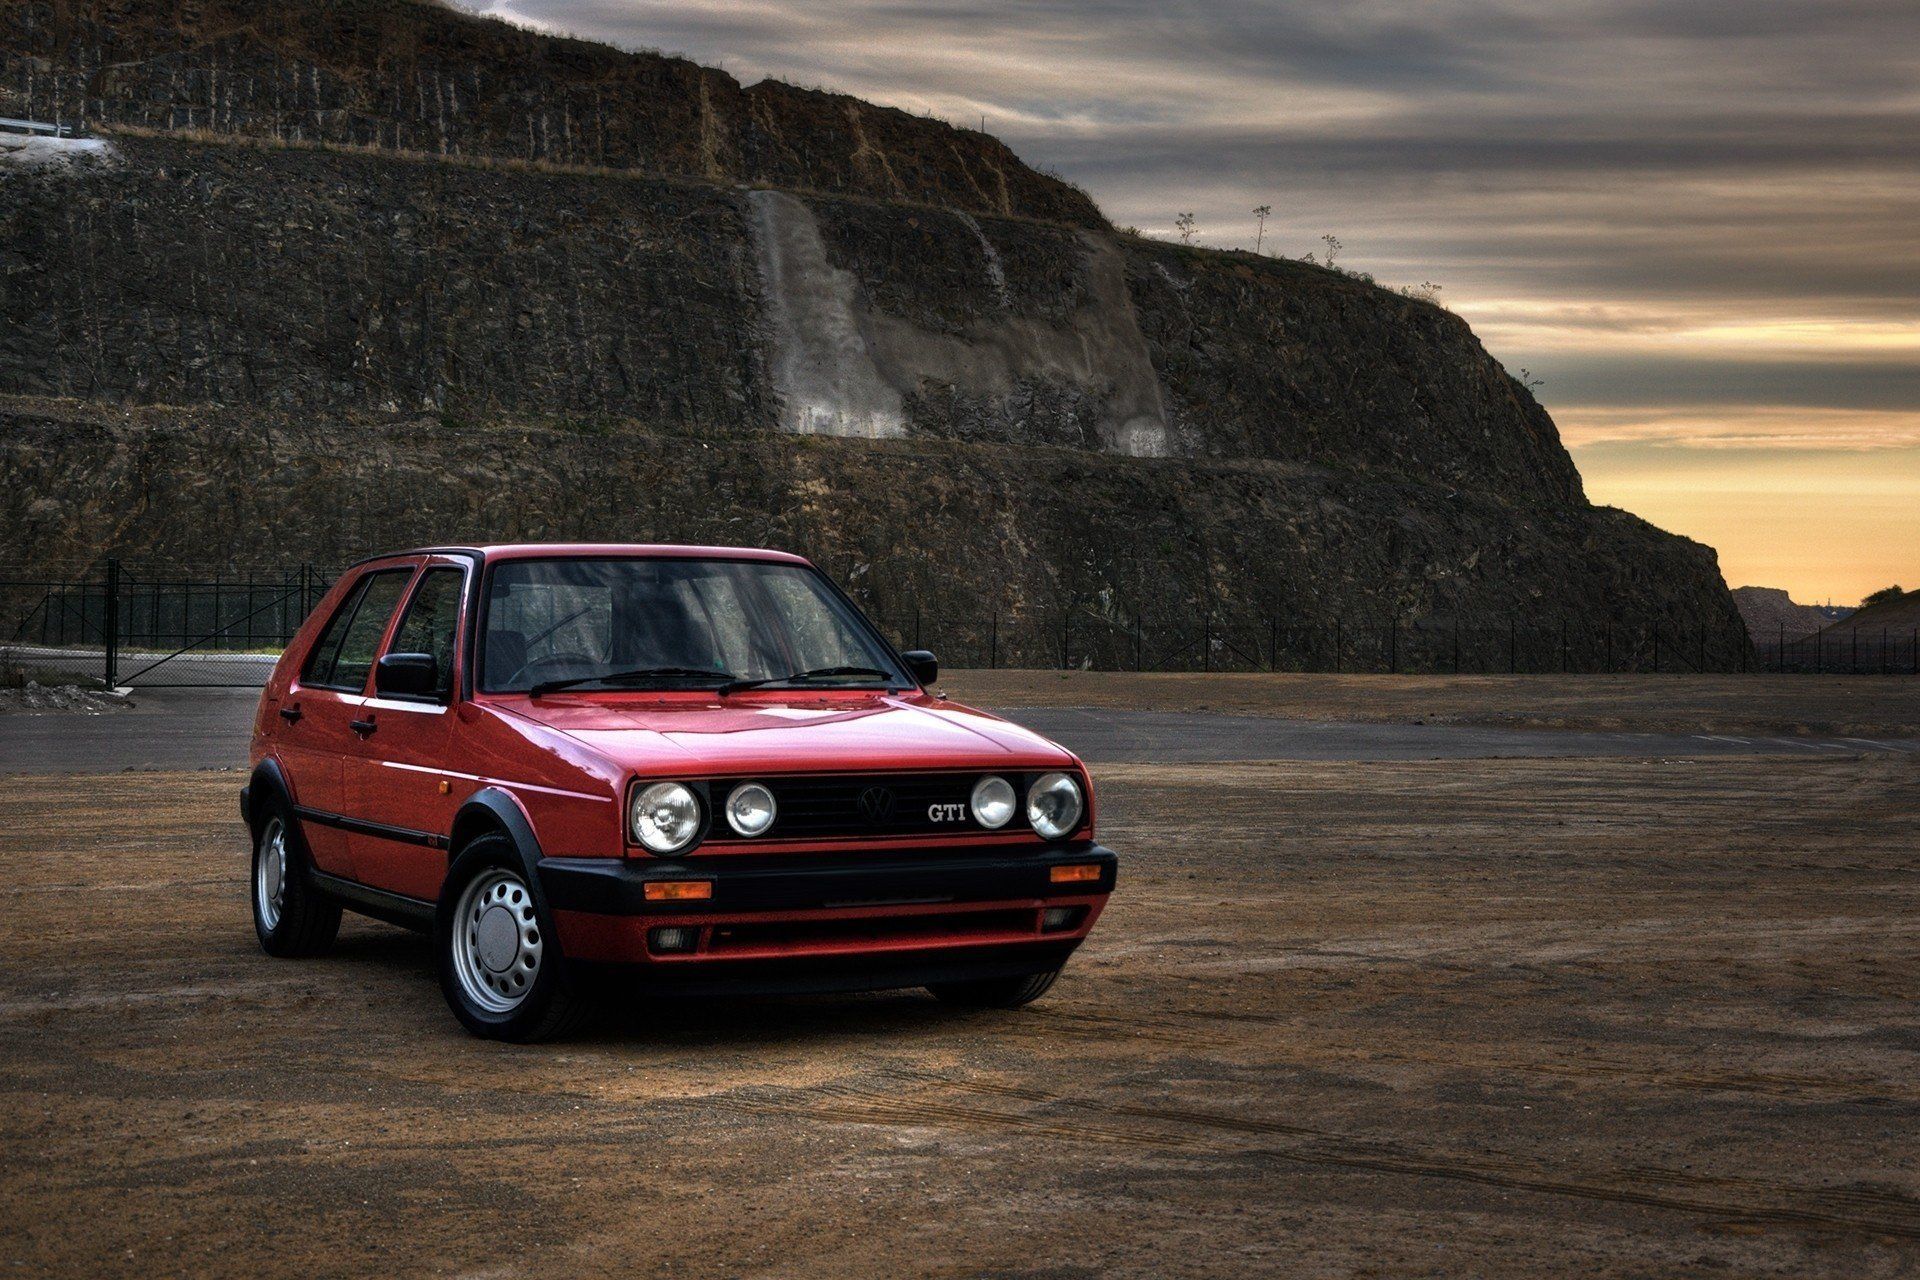 Pimped Golf Mk1 Images Wallpapers